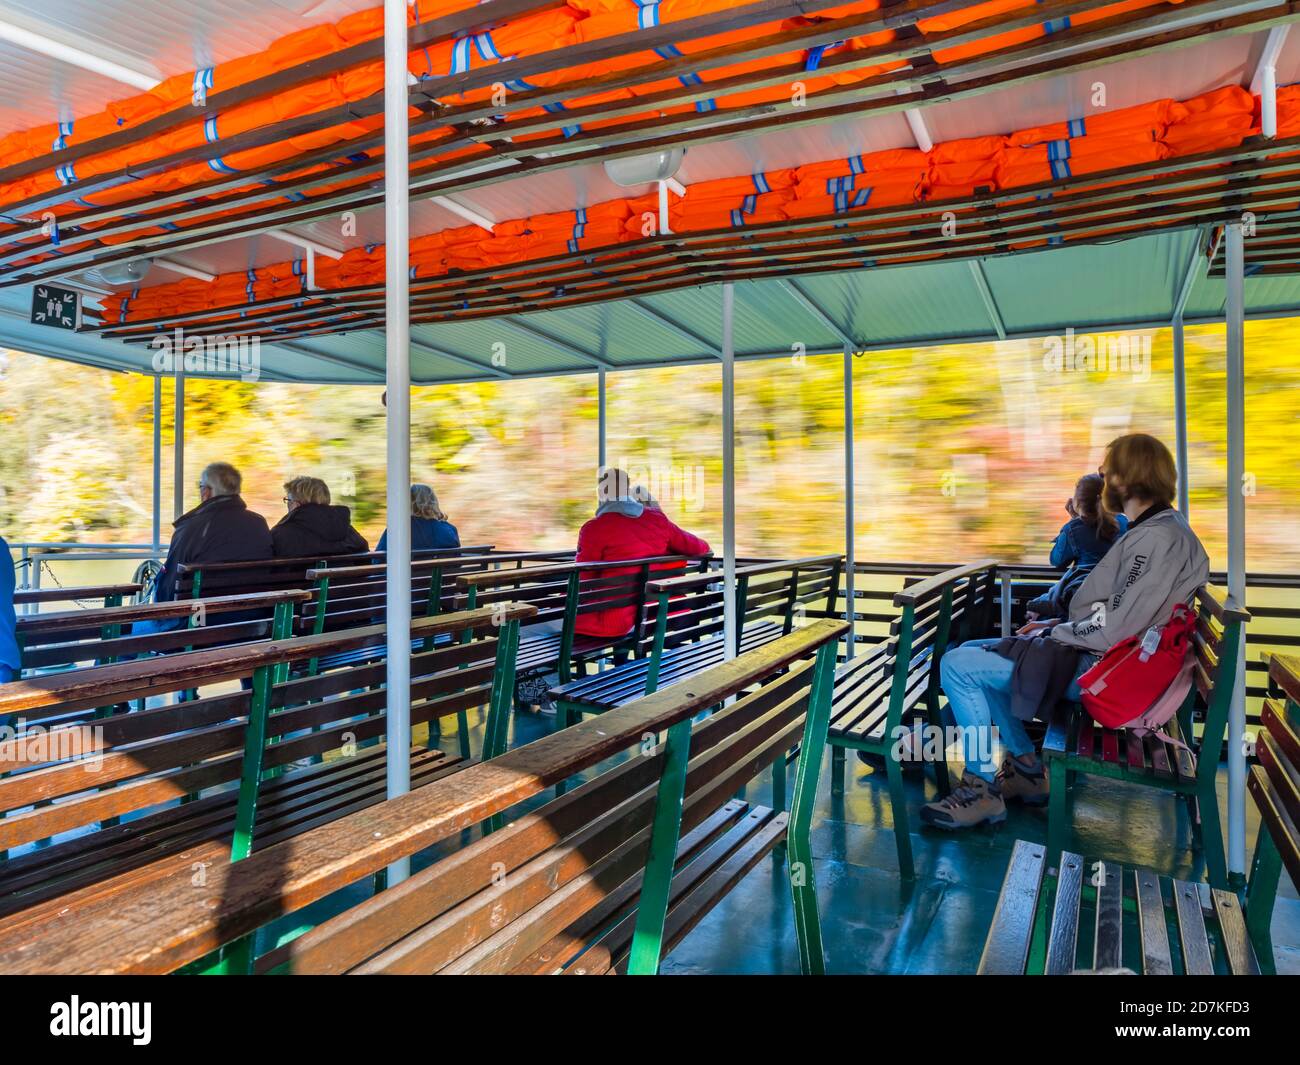 Lake passenger boat passenger visitors sitting watching vegetation passing by blurry portraying speed movement in Plitvice lakes in Croatia Europe Stock Photo